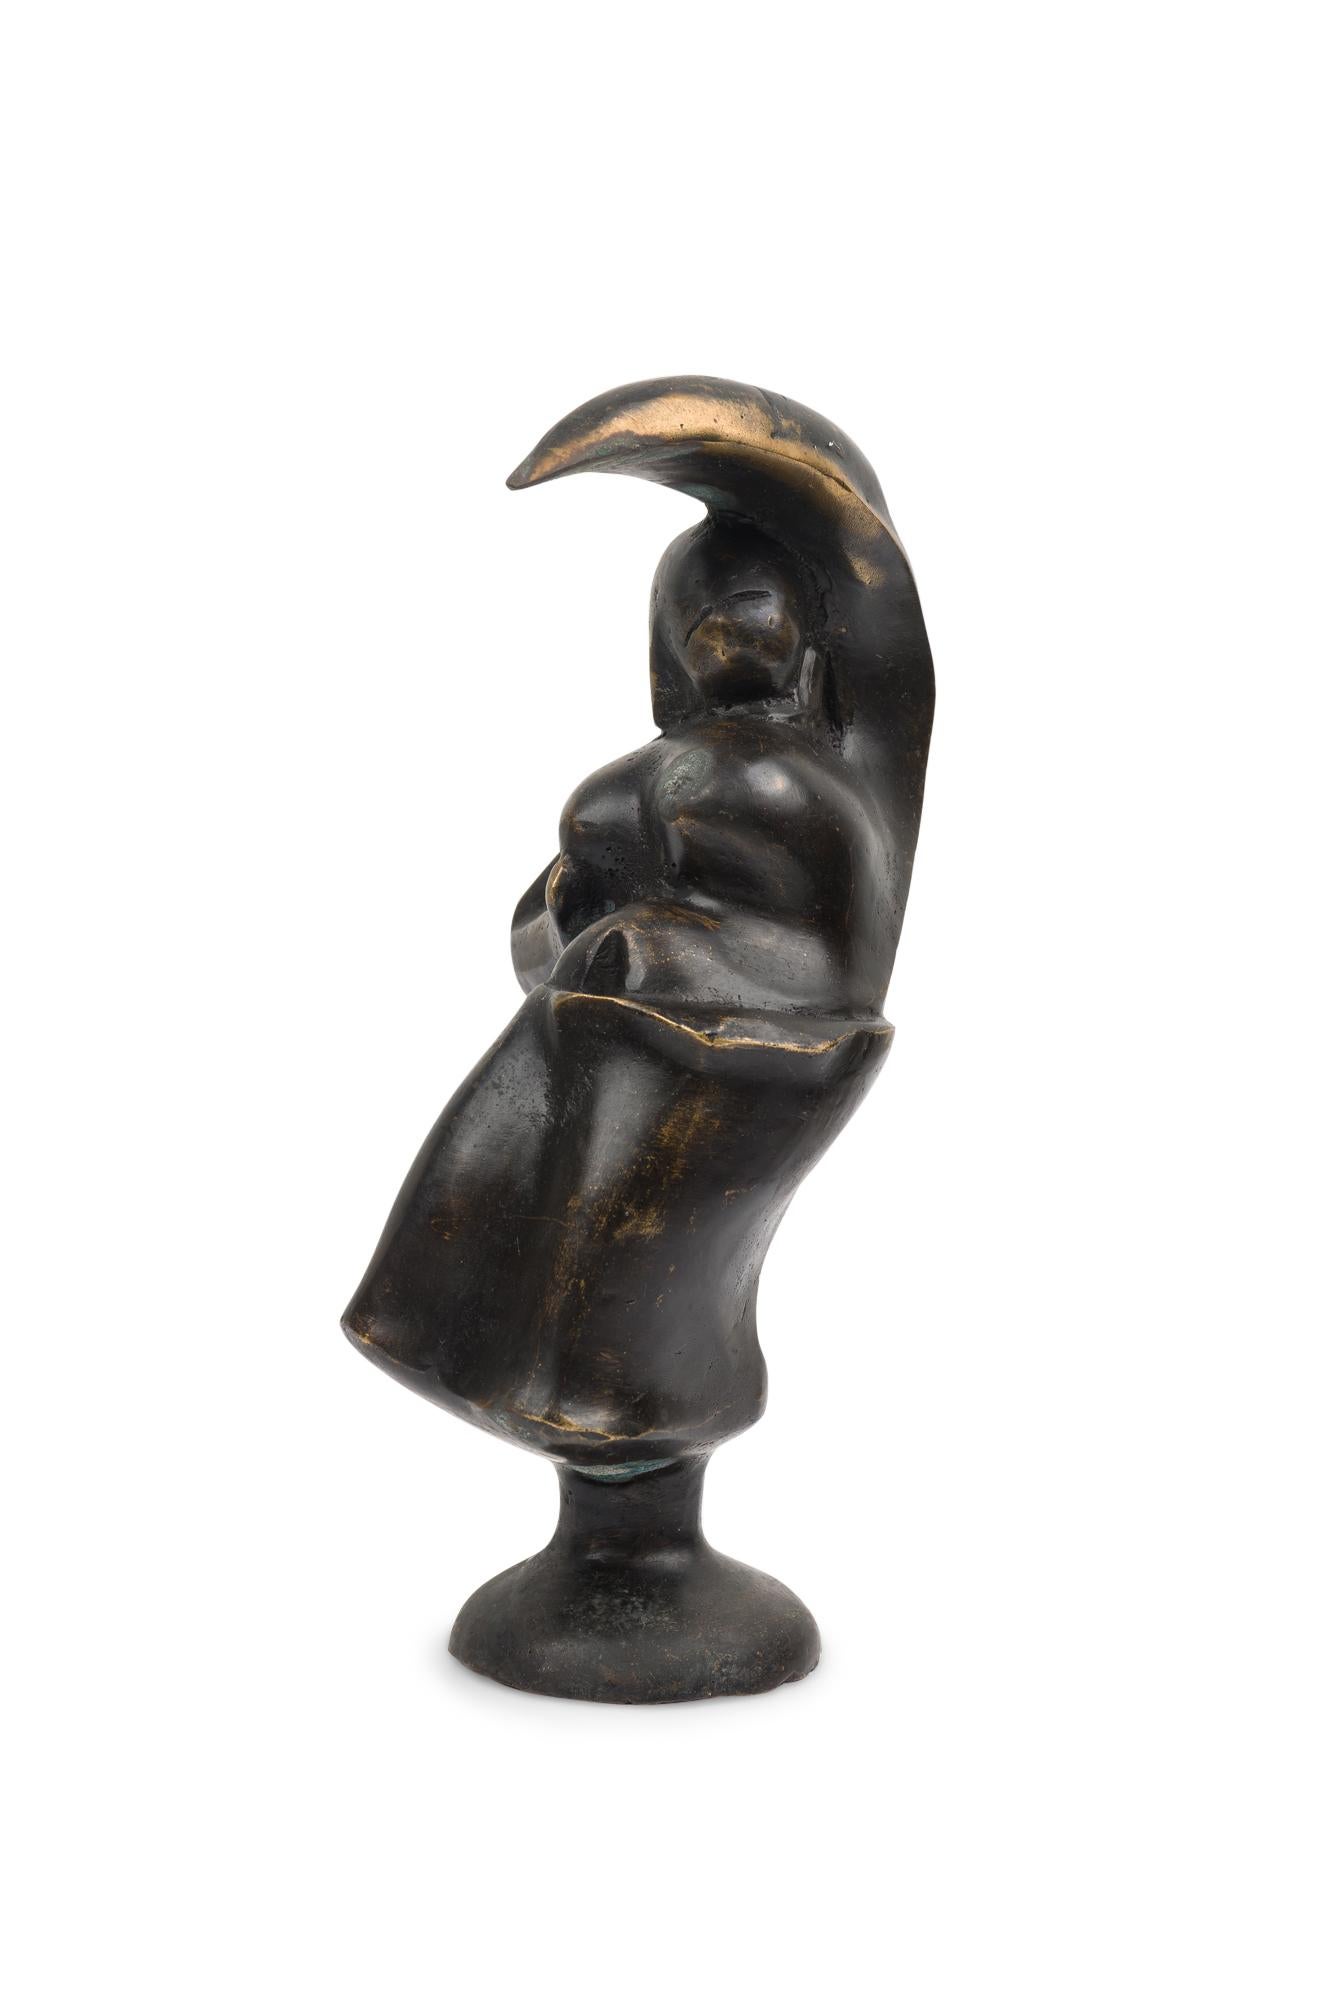 Contemporary hand-forged bronze Brutalist-inspired figural sculpture depicting a female carved into a crescent moon shape finished in an ebonized patina. (PRICED EACH) (